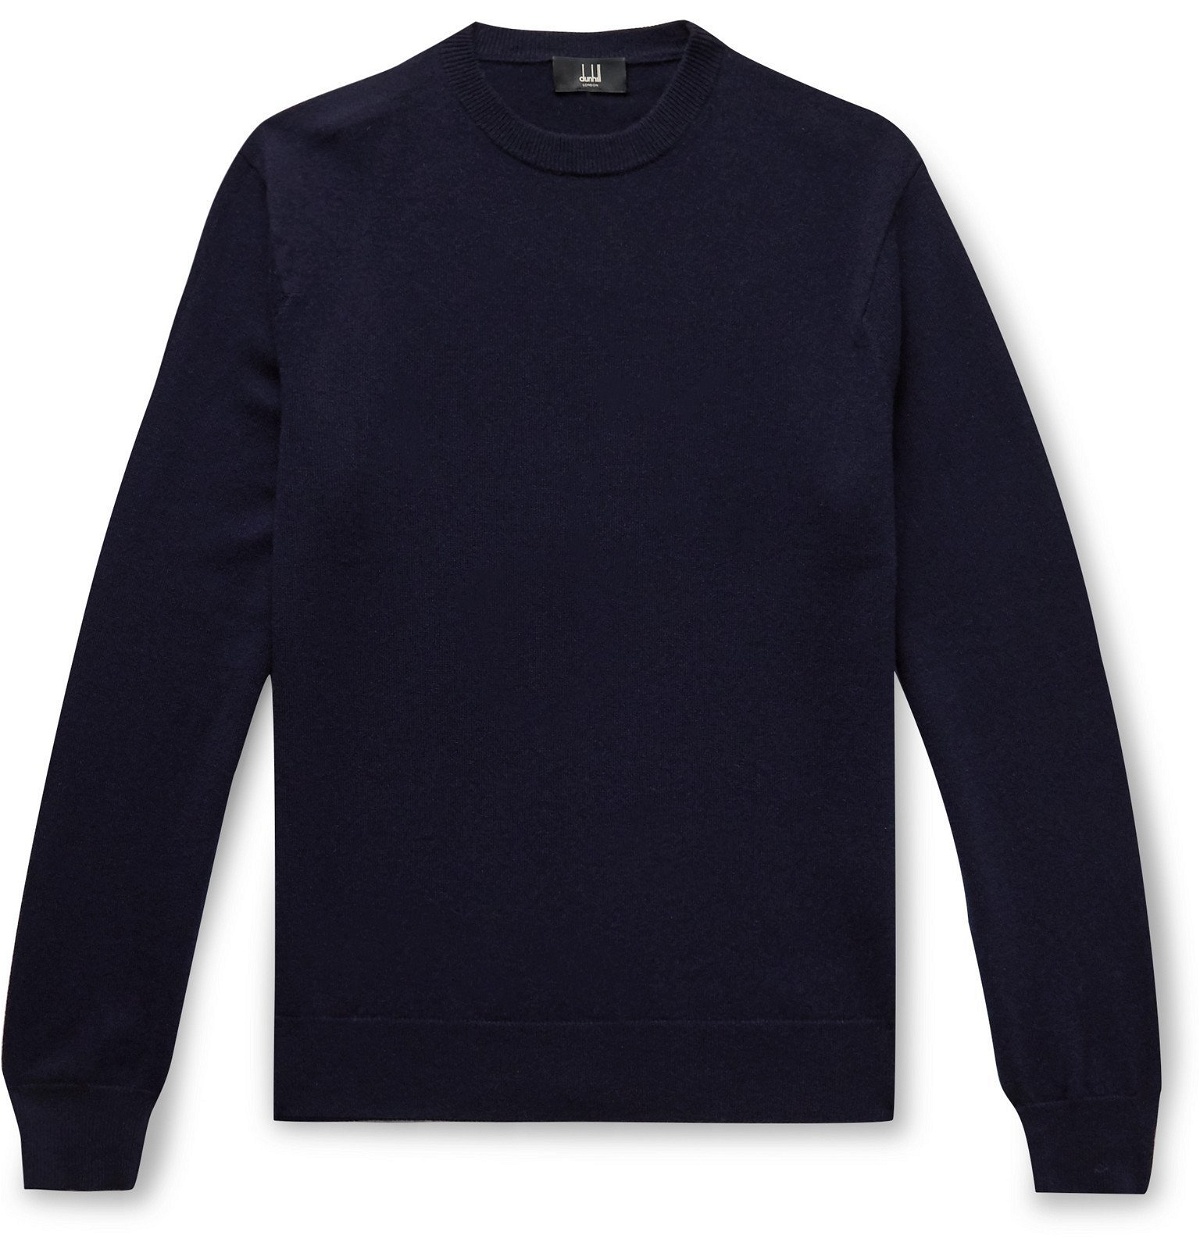 Dunhill - Cashmere Sweater - Blue Dunhill